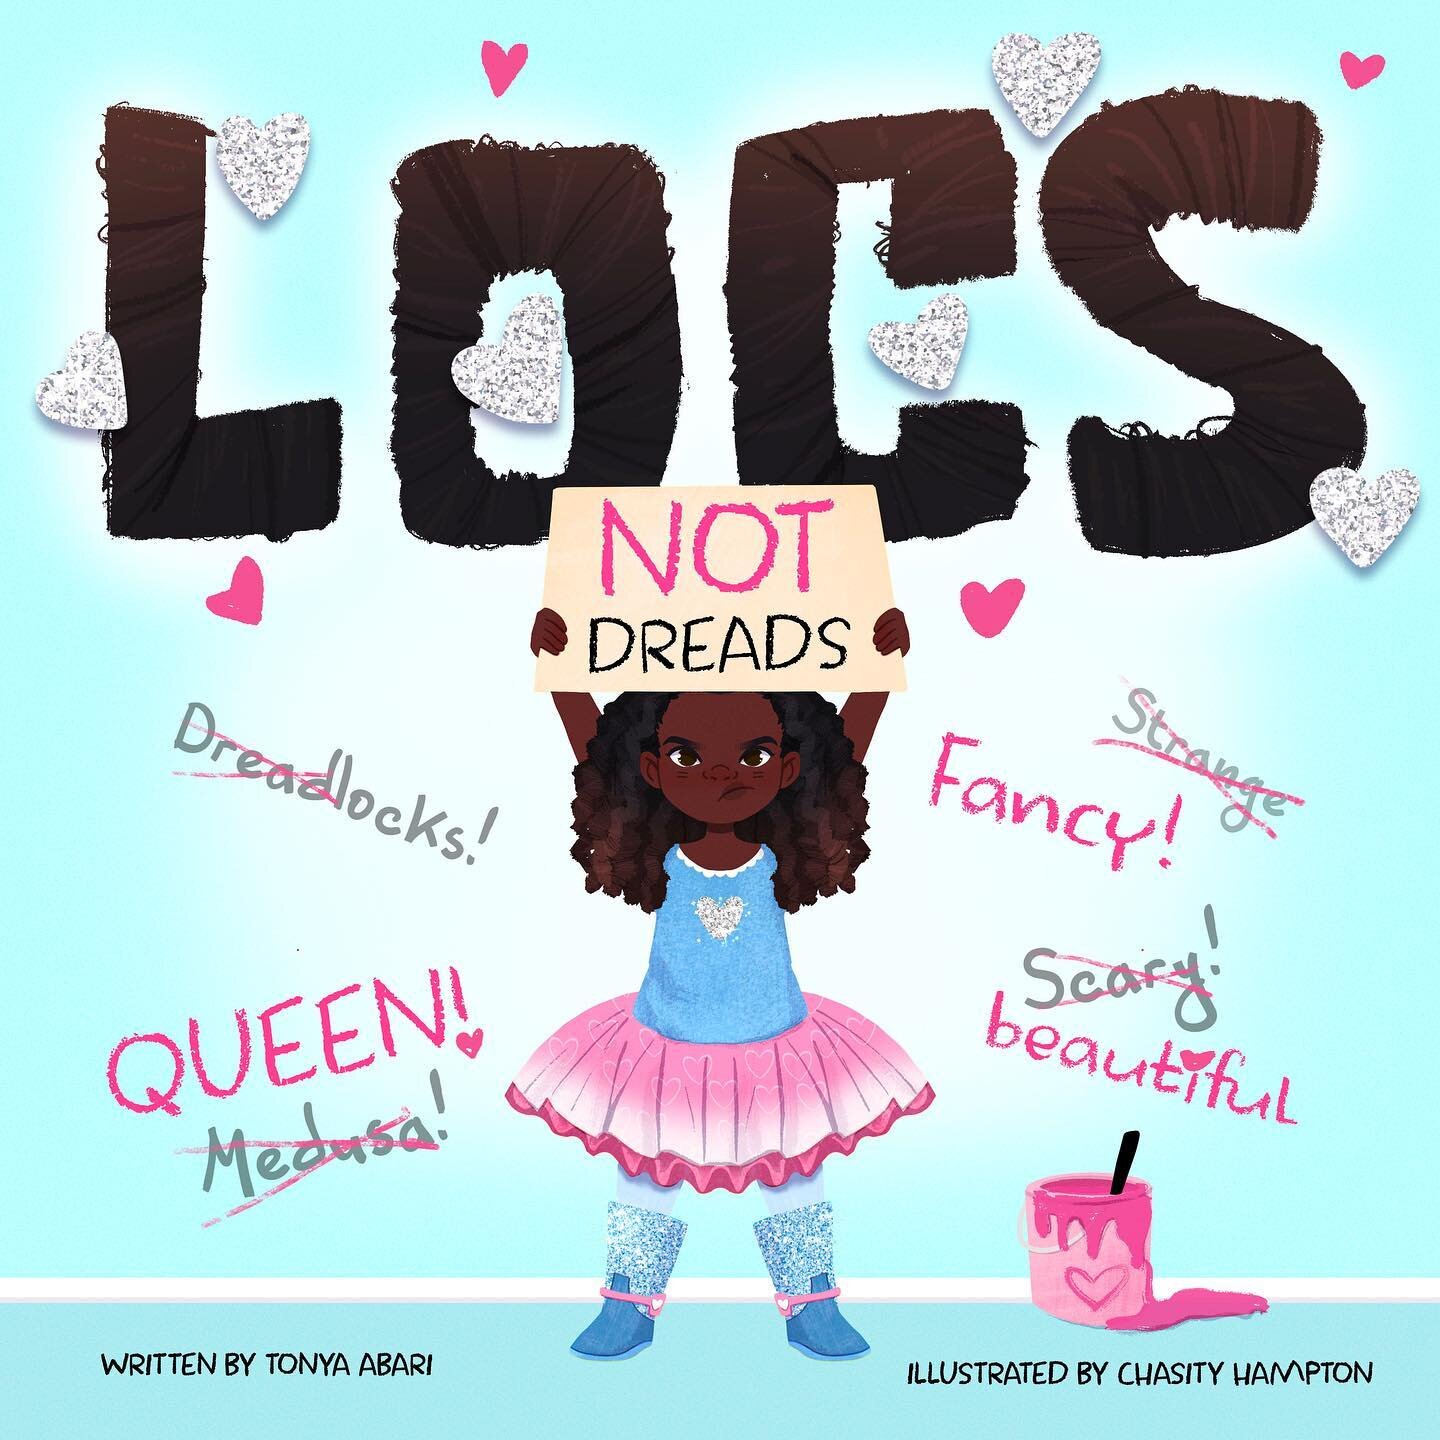 COVER REVEAL! Locs, Not Dreads

Selah can't wait to show off her newly loc'd hair at school, but when she bounces off the bus, her classmates react with whispers and a word Selah hasn't heard before: dreadlocks. The word dread makes her uneasy: is th